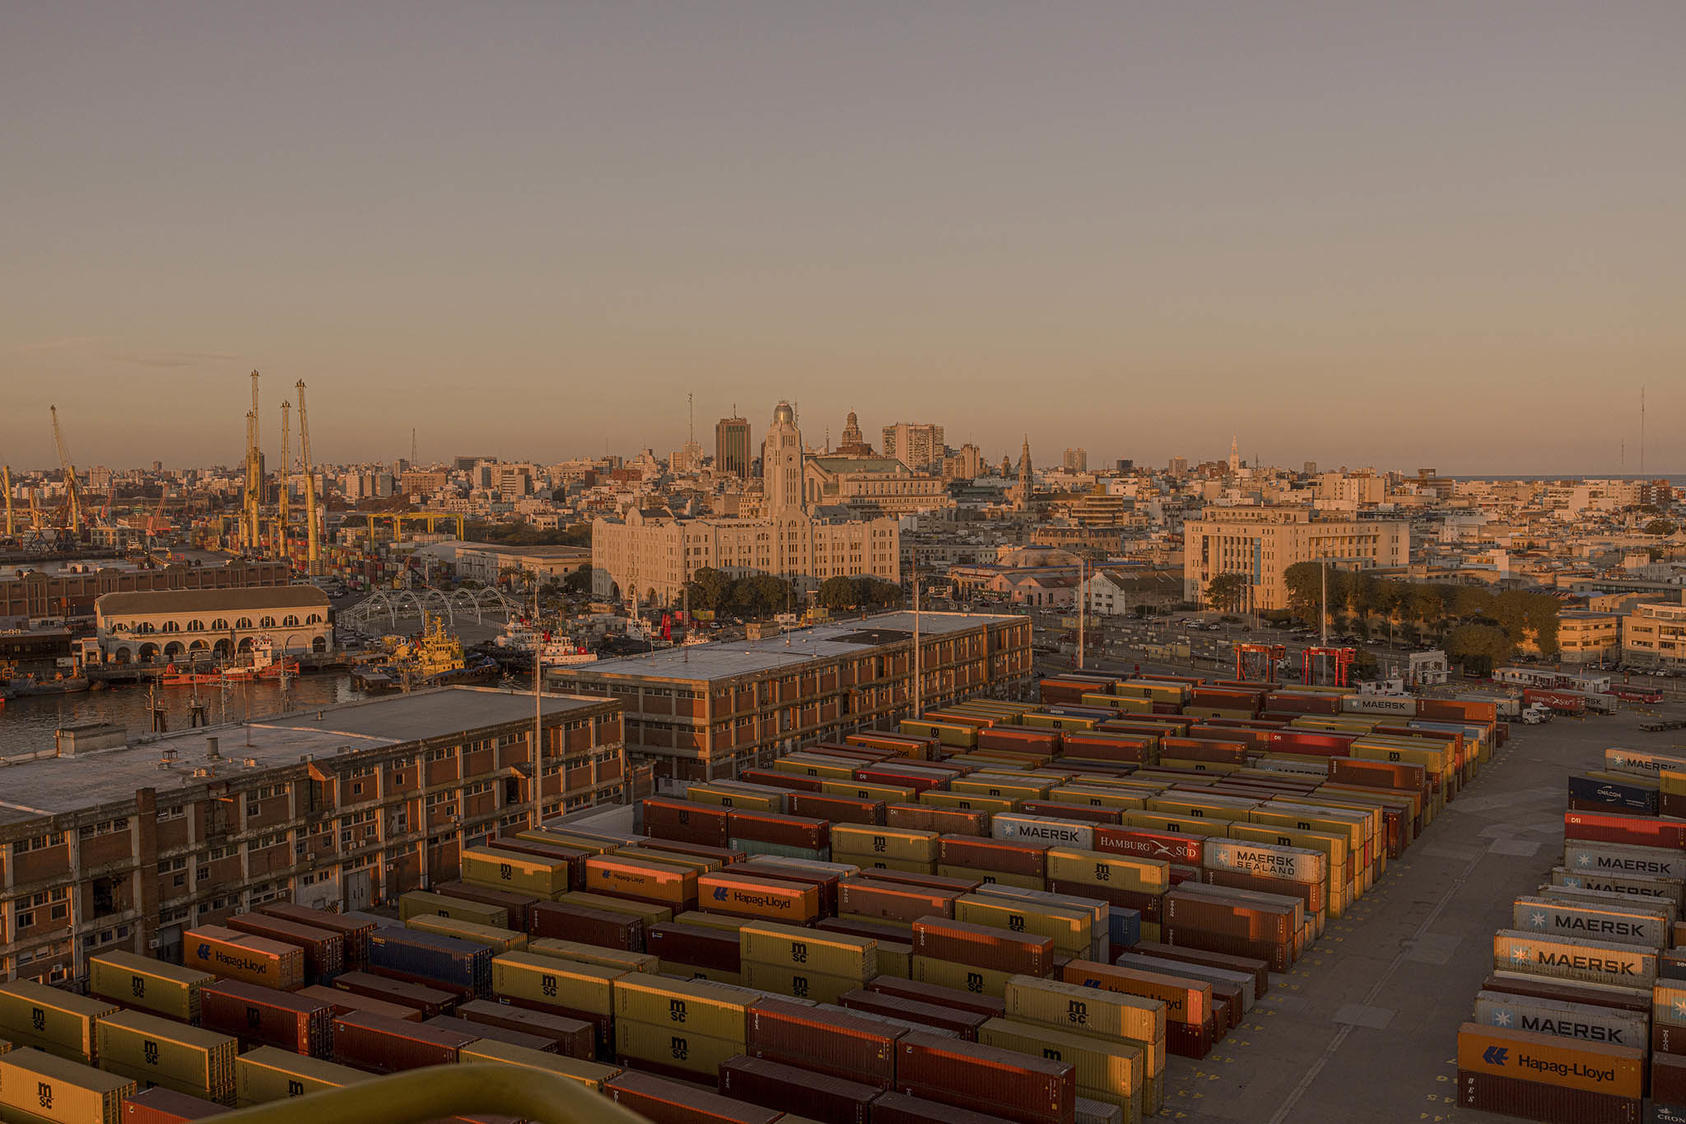 The container port and city of Montevideo, Uruguay on June 15, 2023. Uruguay recently pursued a trade deal with China. (Sarah Pabst/The New York Times)